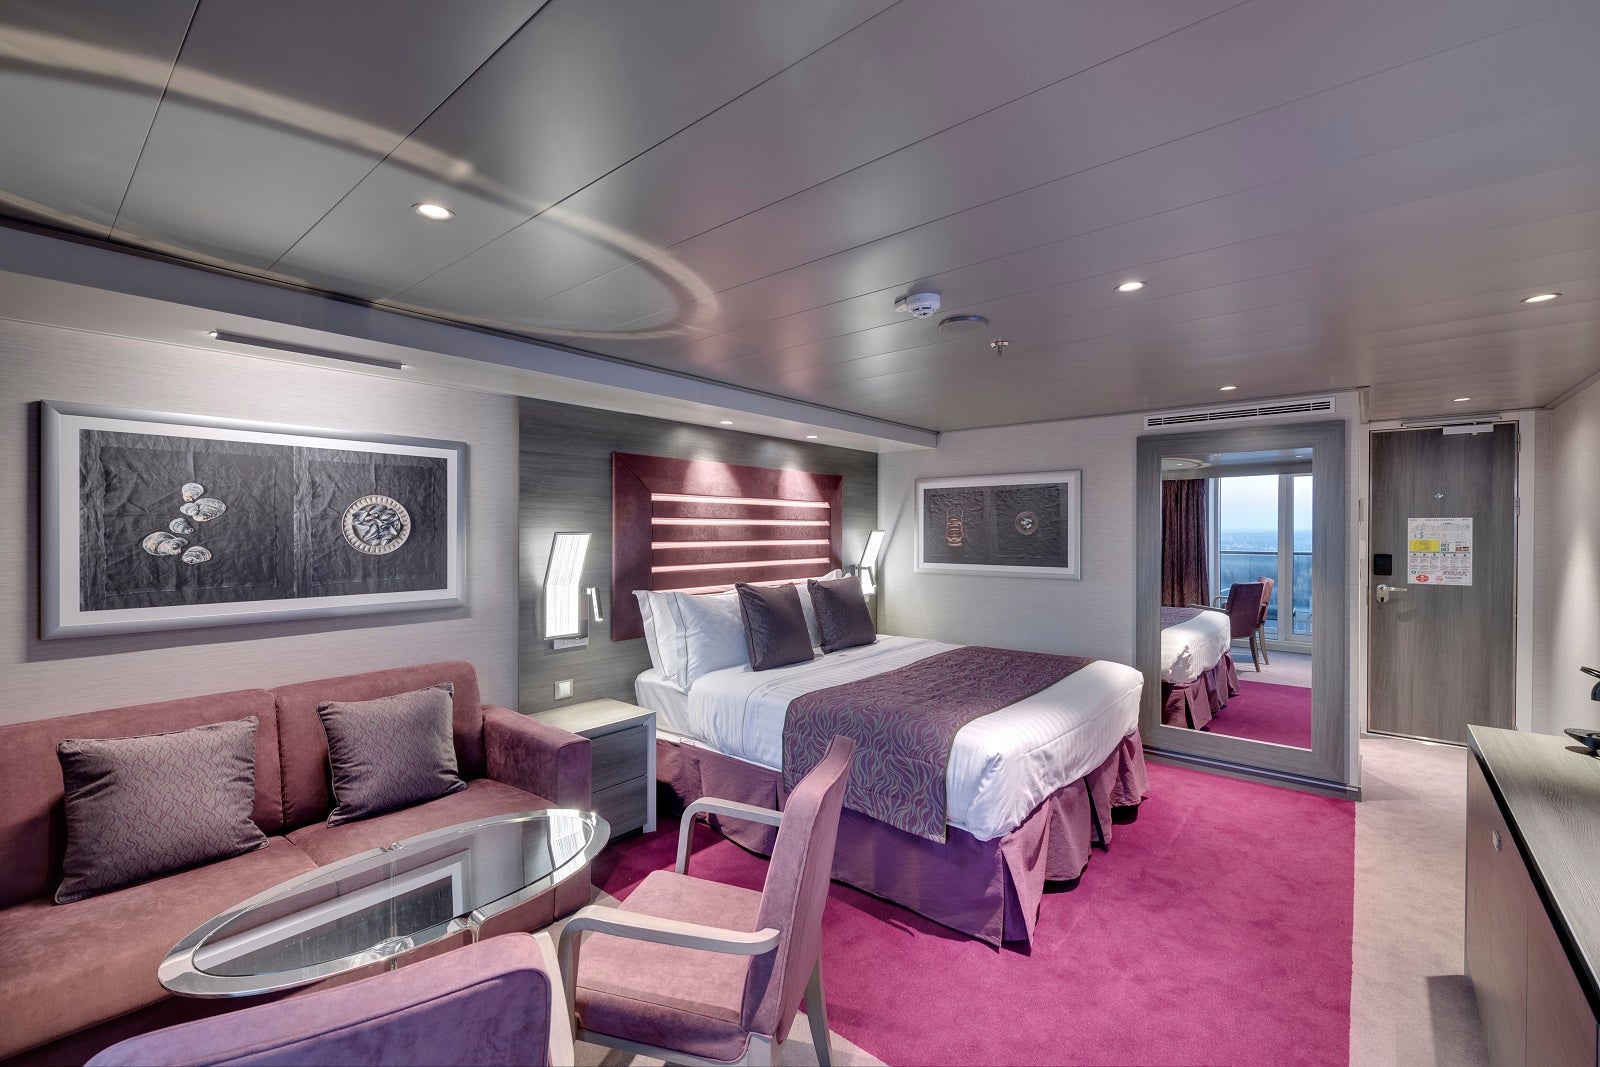 A cruise ship cabin decorated in mauve colors with a bed, sofa, table, chairs and a large mirror